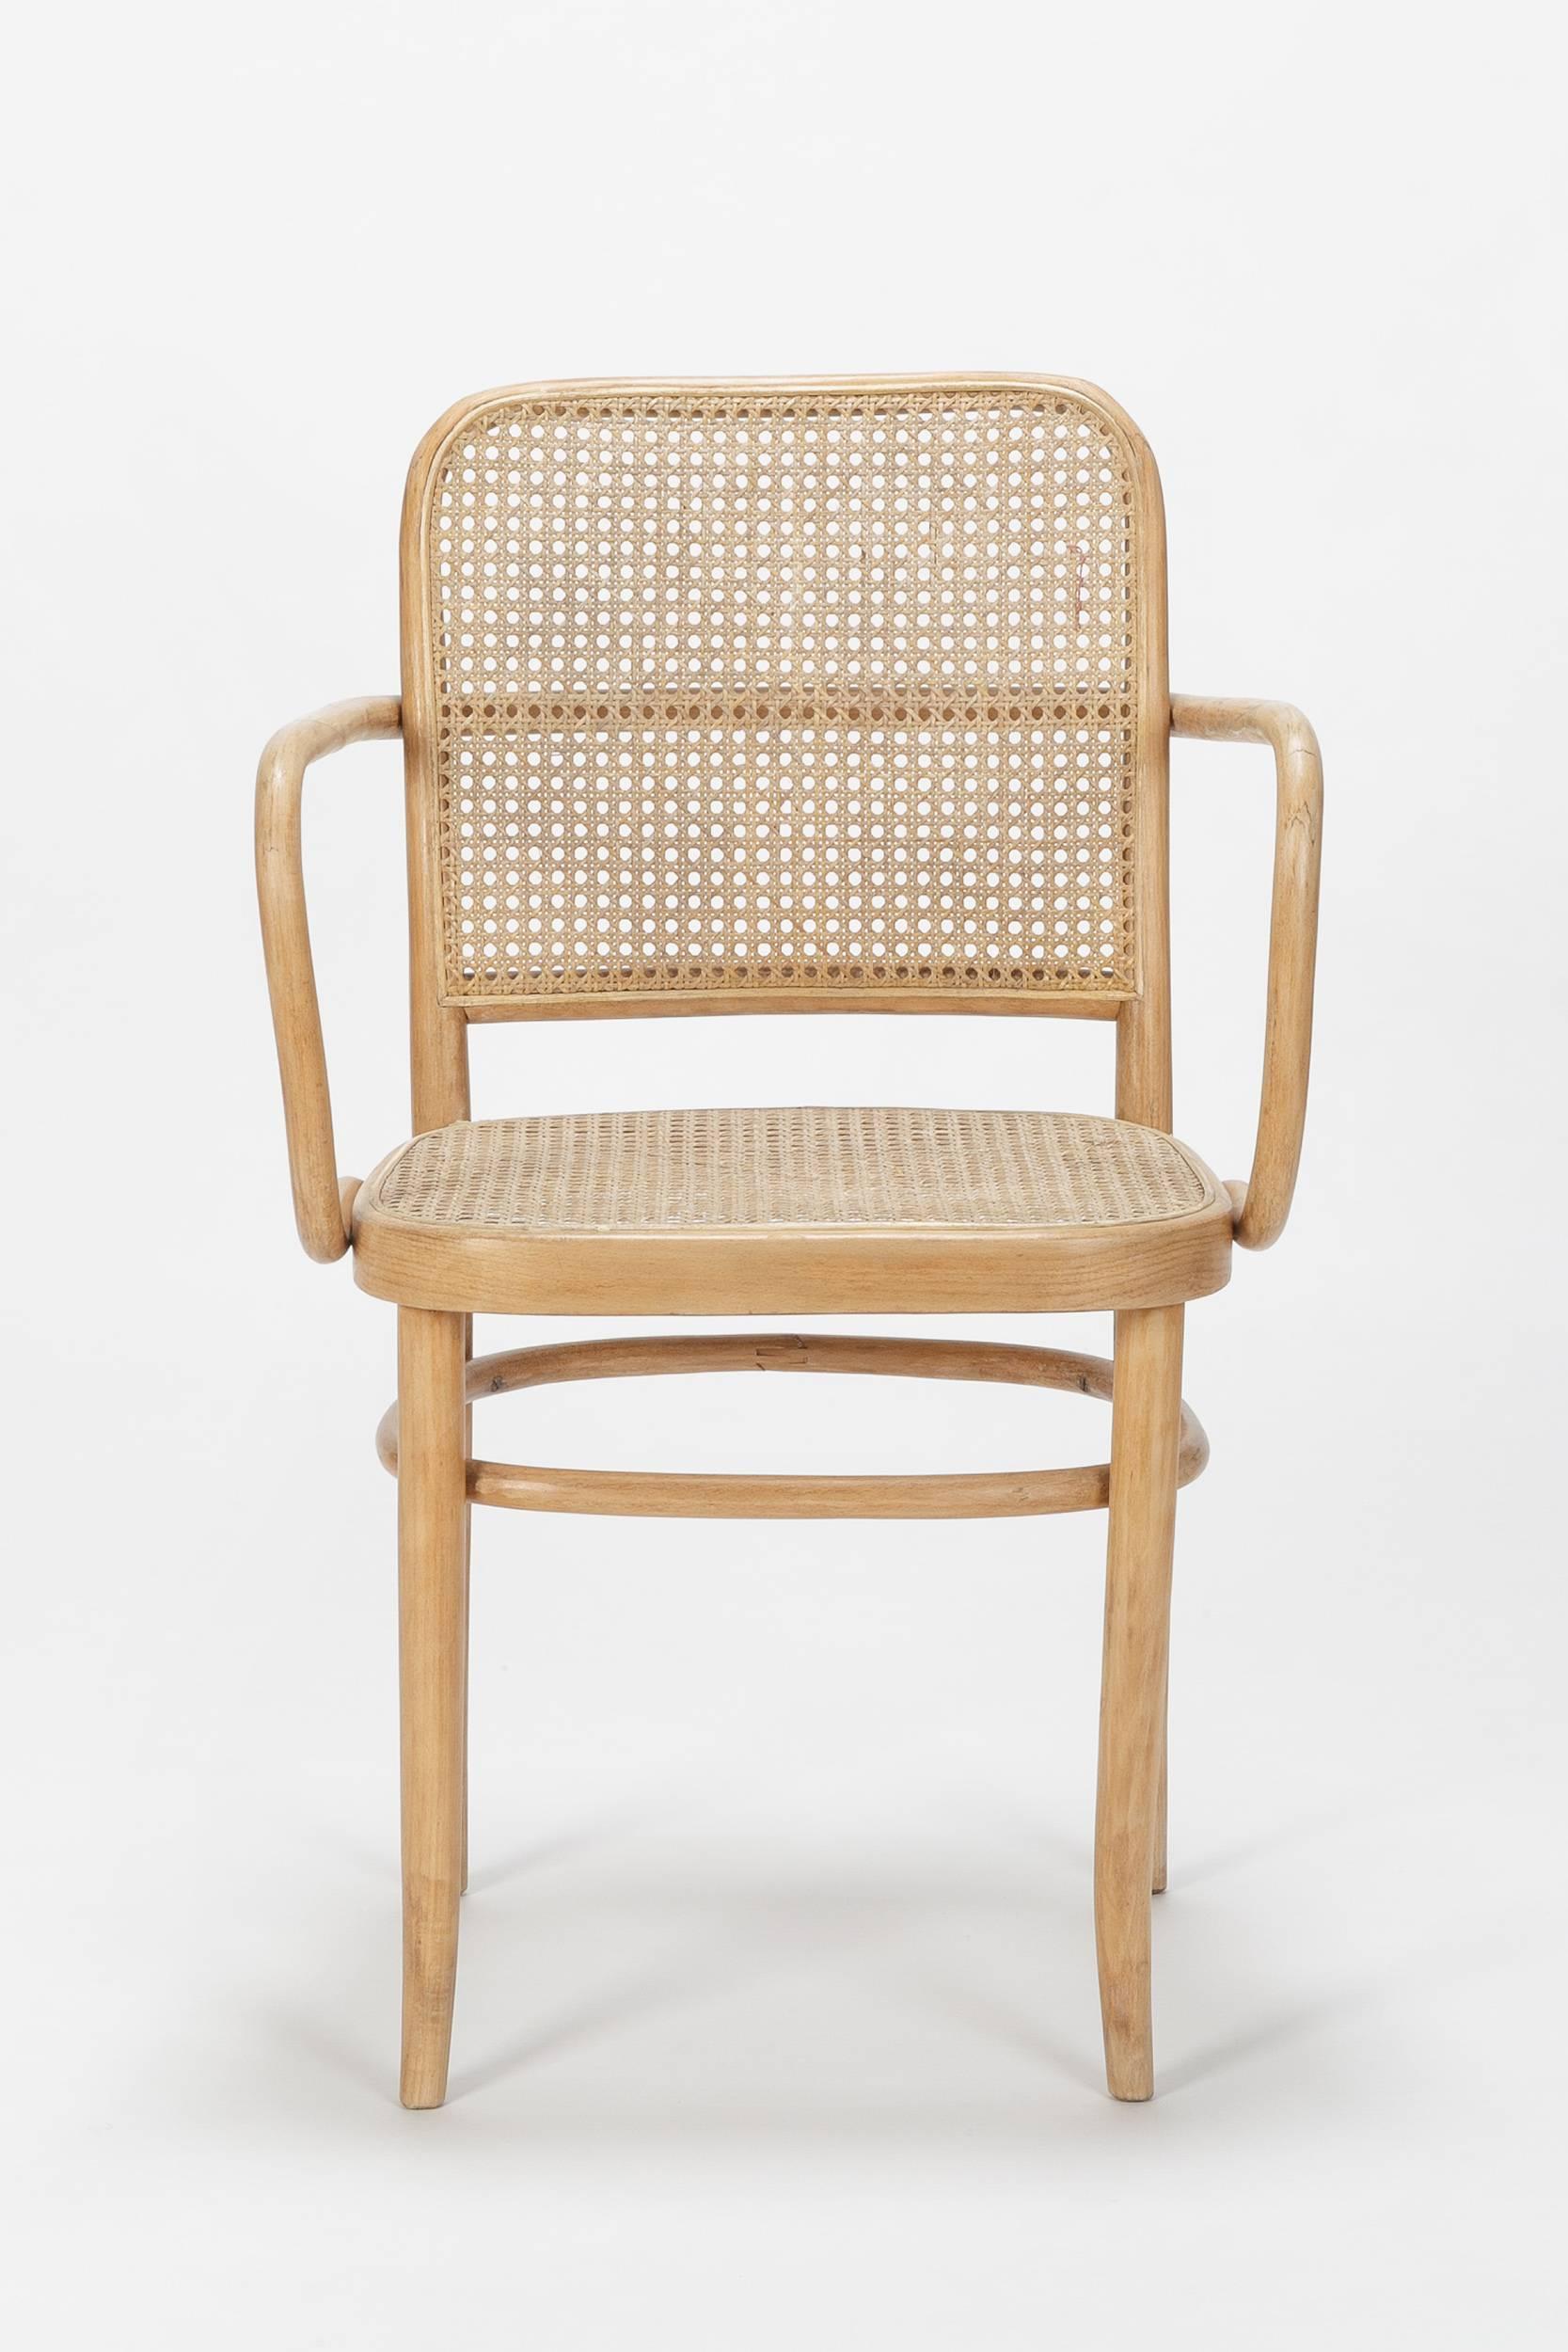 An all original Prague chair by Josef Frank designed in the 1920s, it went in production with many different manufacturers, this model was manufactured in Italy by Salvatore Leone in the 1940s. Solid beech wood frame with the original cane webbing.